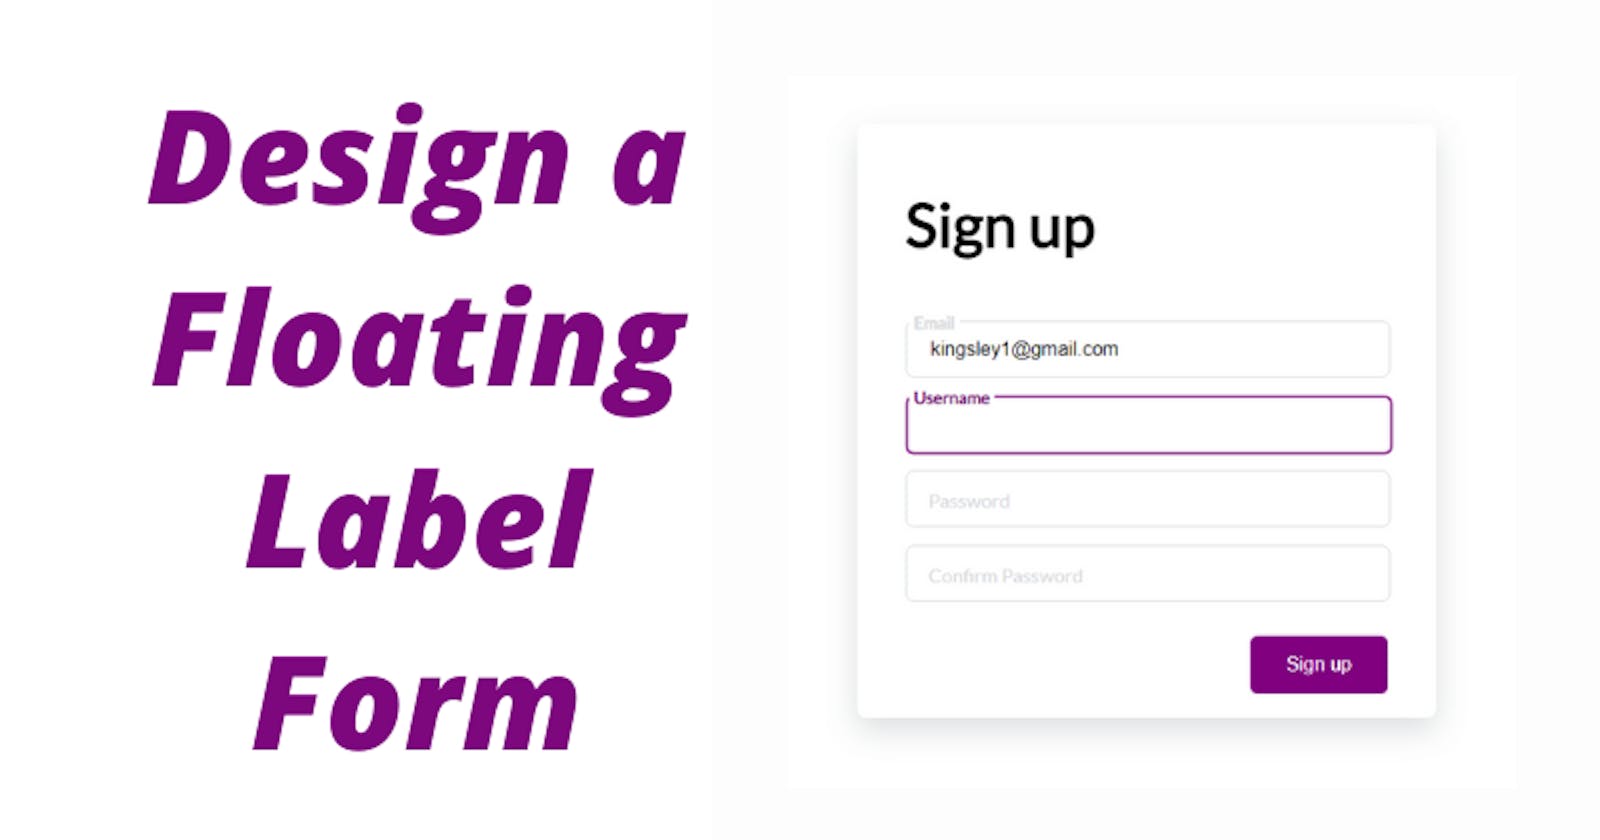 How to Build a Sign Up Form with Floating Labels and Transitions Using Plain HTML and CSS